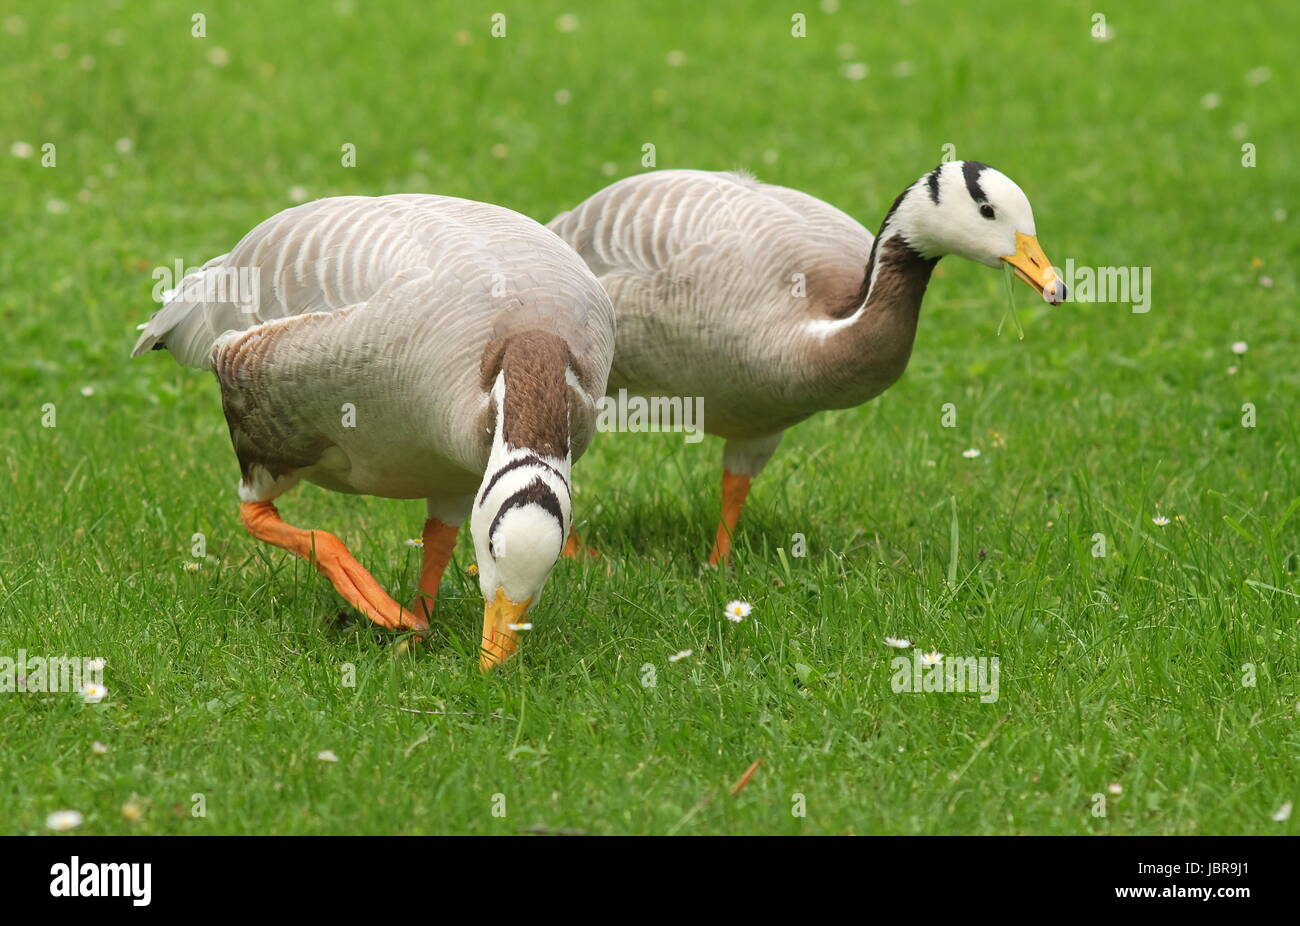 poultry goose Stock Photo